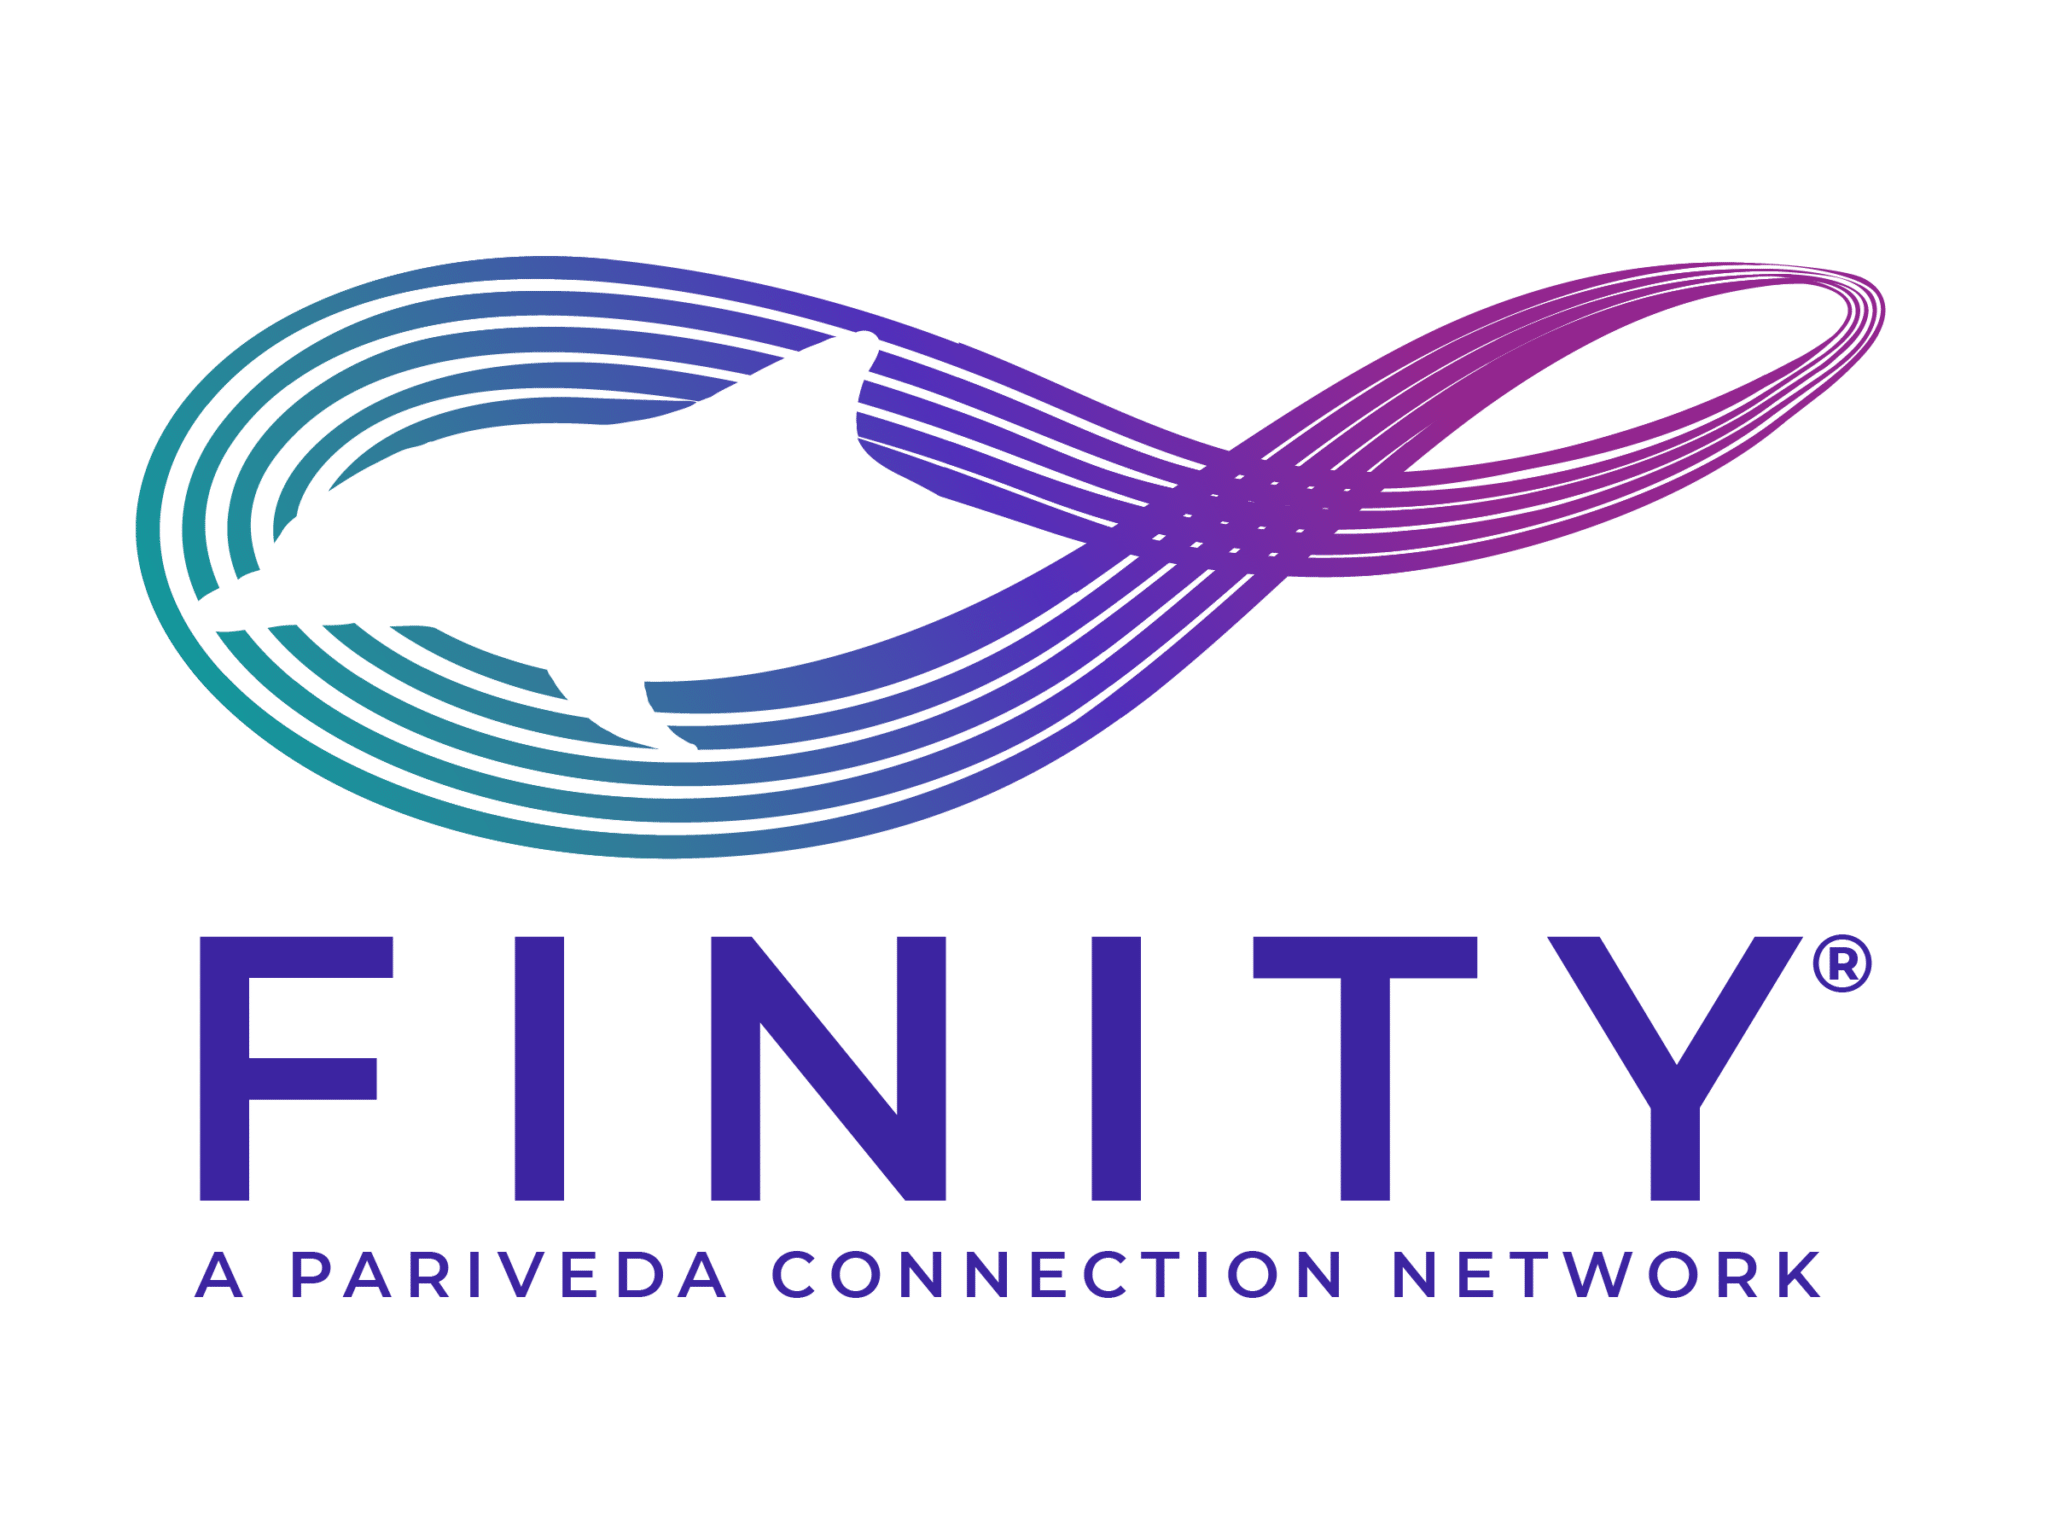 pariveda connection network Finity alumni logo with purple gradient and dolphin infinity graphic